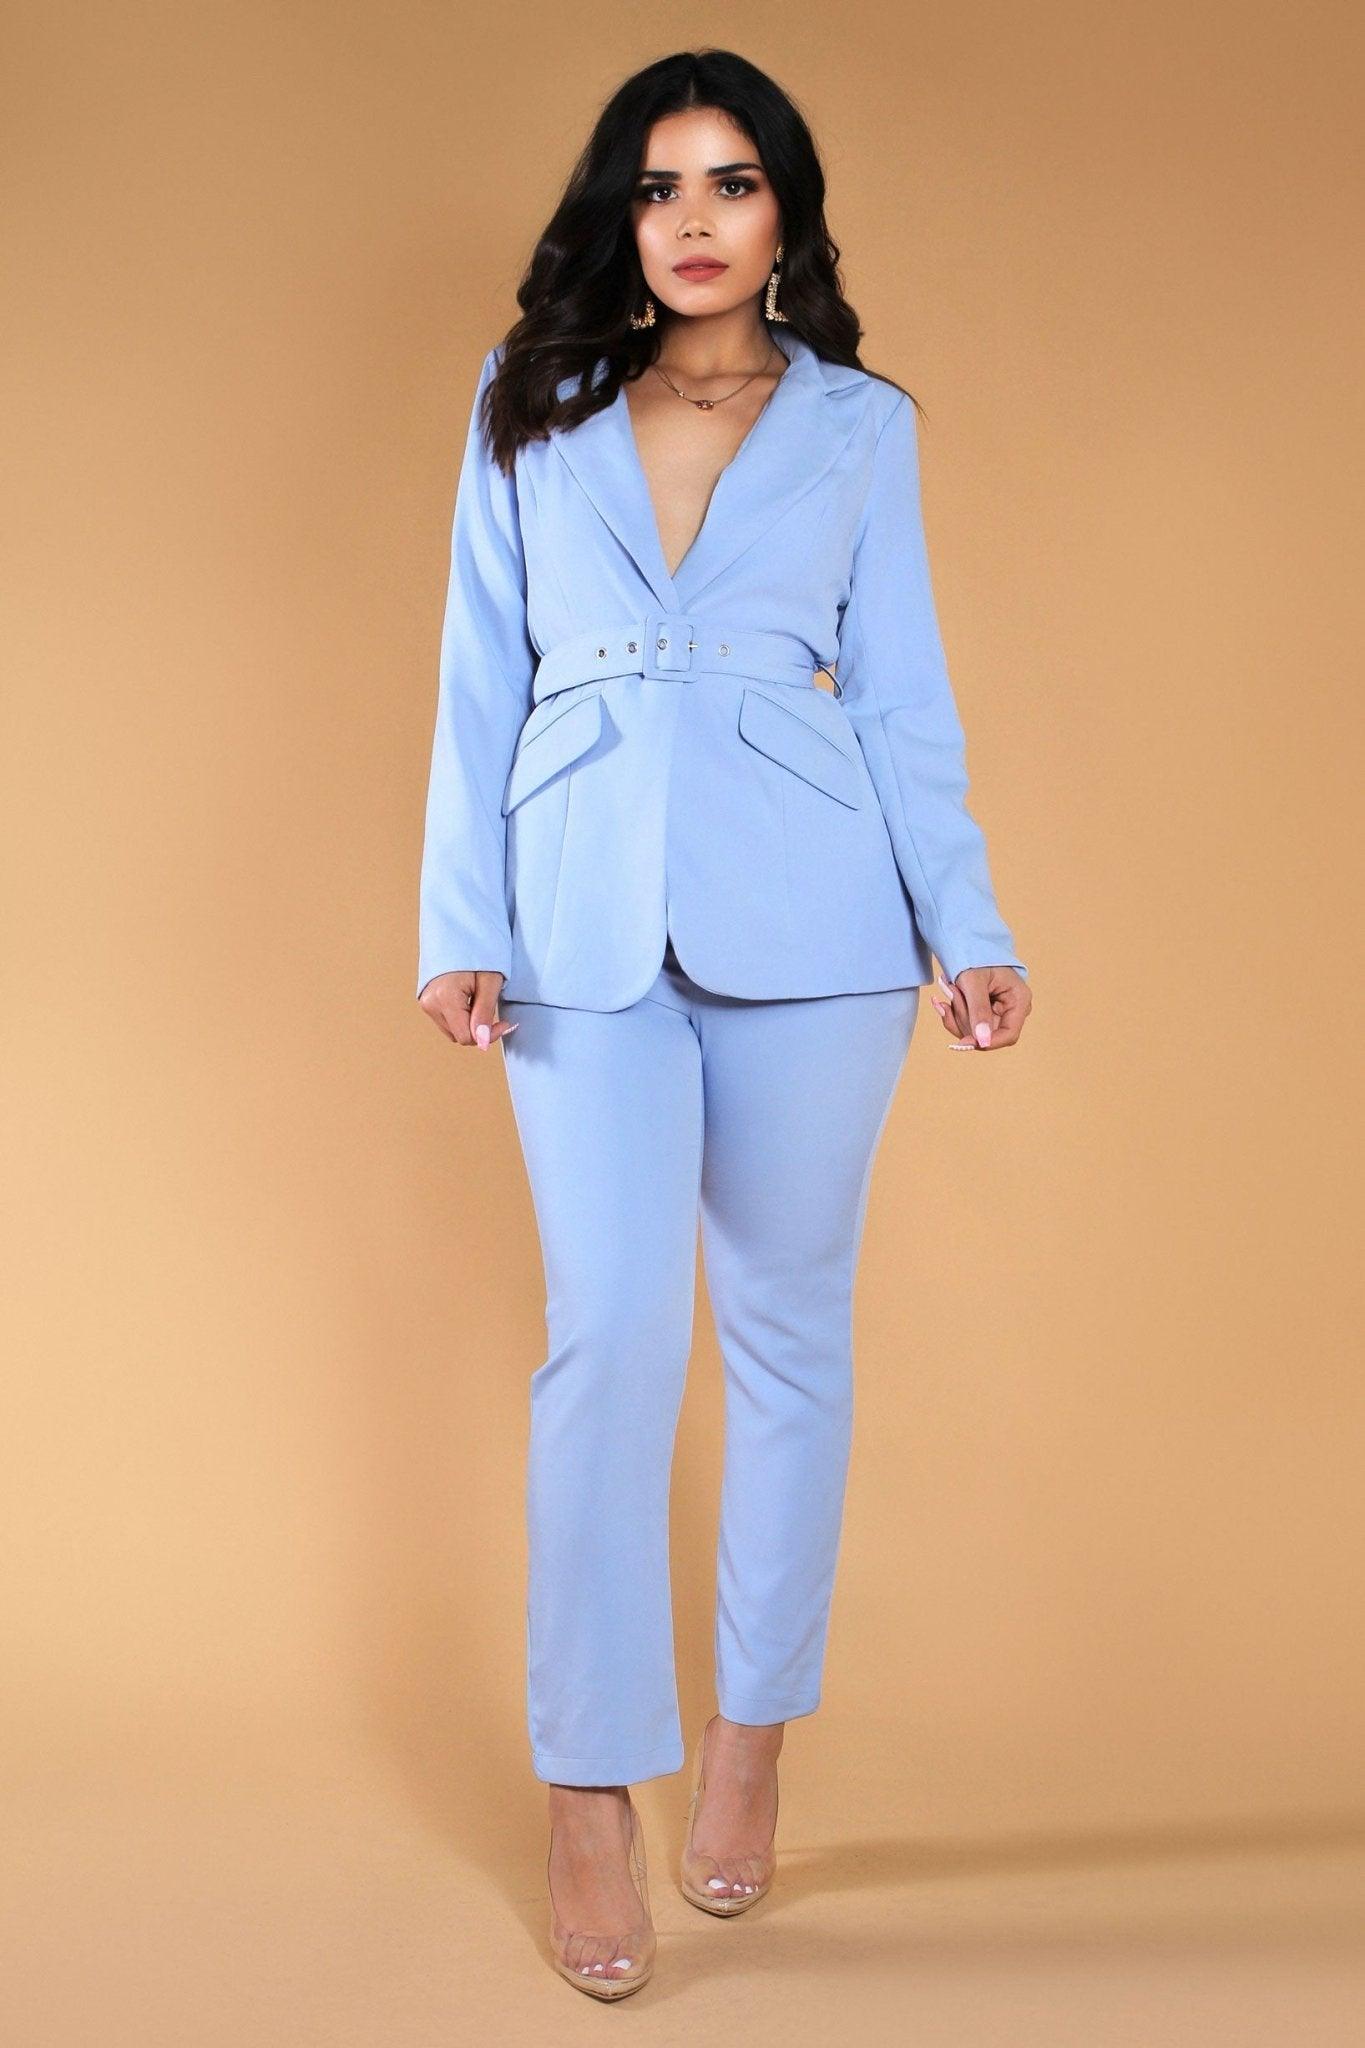 Office Babe Blazer and Pants Set - MY SEXY STYLES